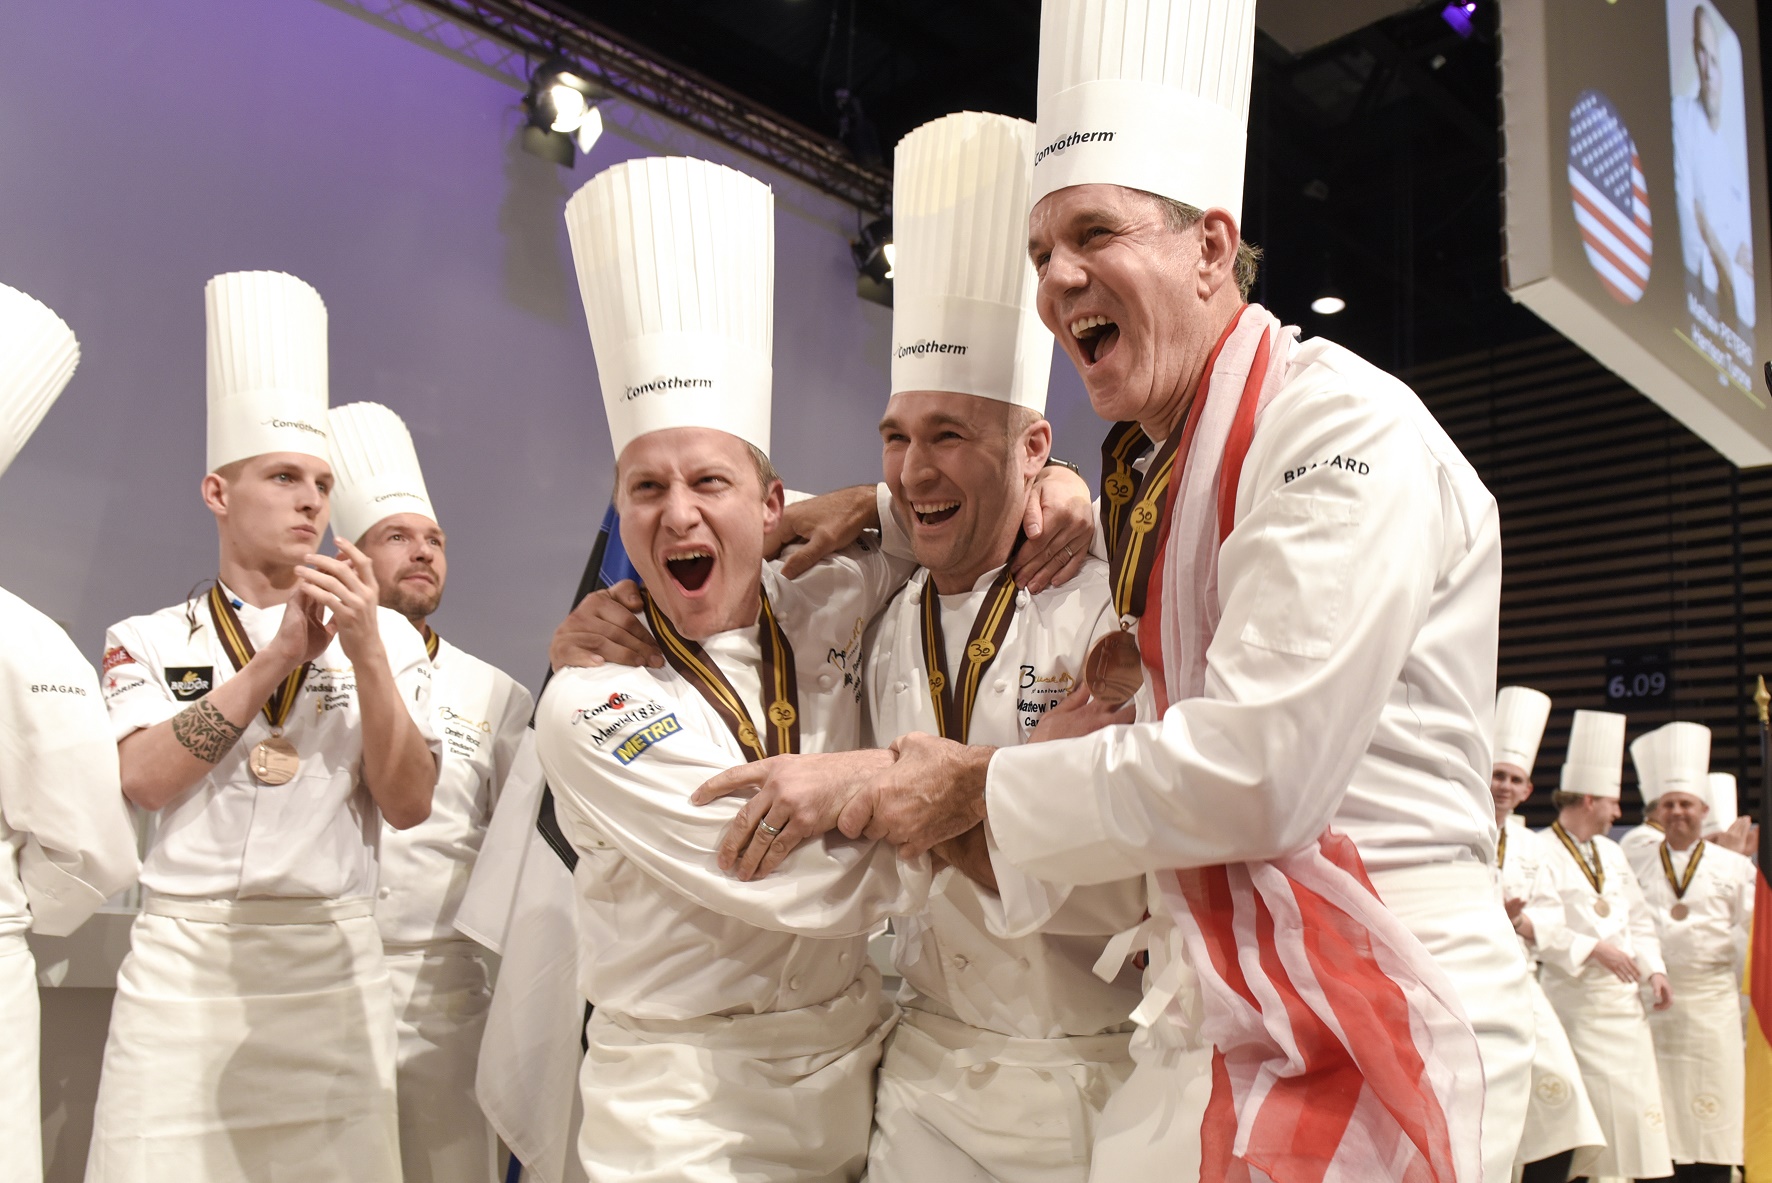 Team USA learns that they have just won the 2017 Bocuse d'Or in Lyon, France. From left to right: Team USA Coach Philip Tessier, Team USA Chef Mathew Peters & Team USA President Thomas Keller. (c) SIR